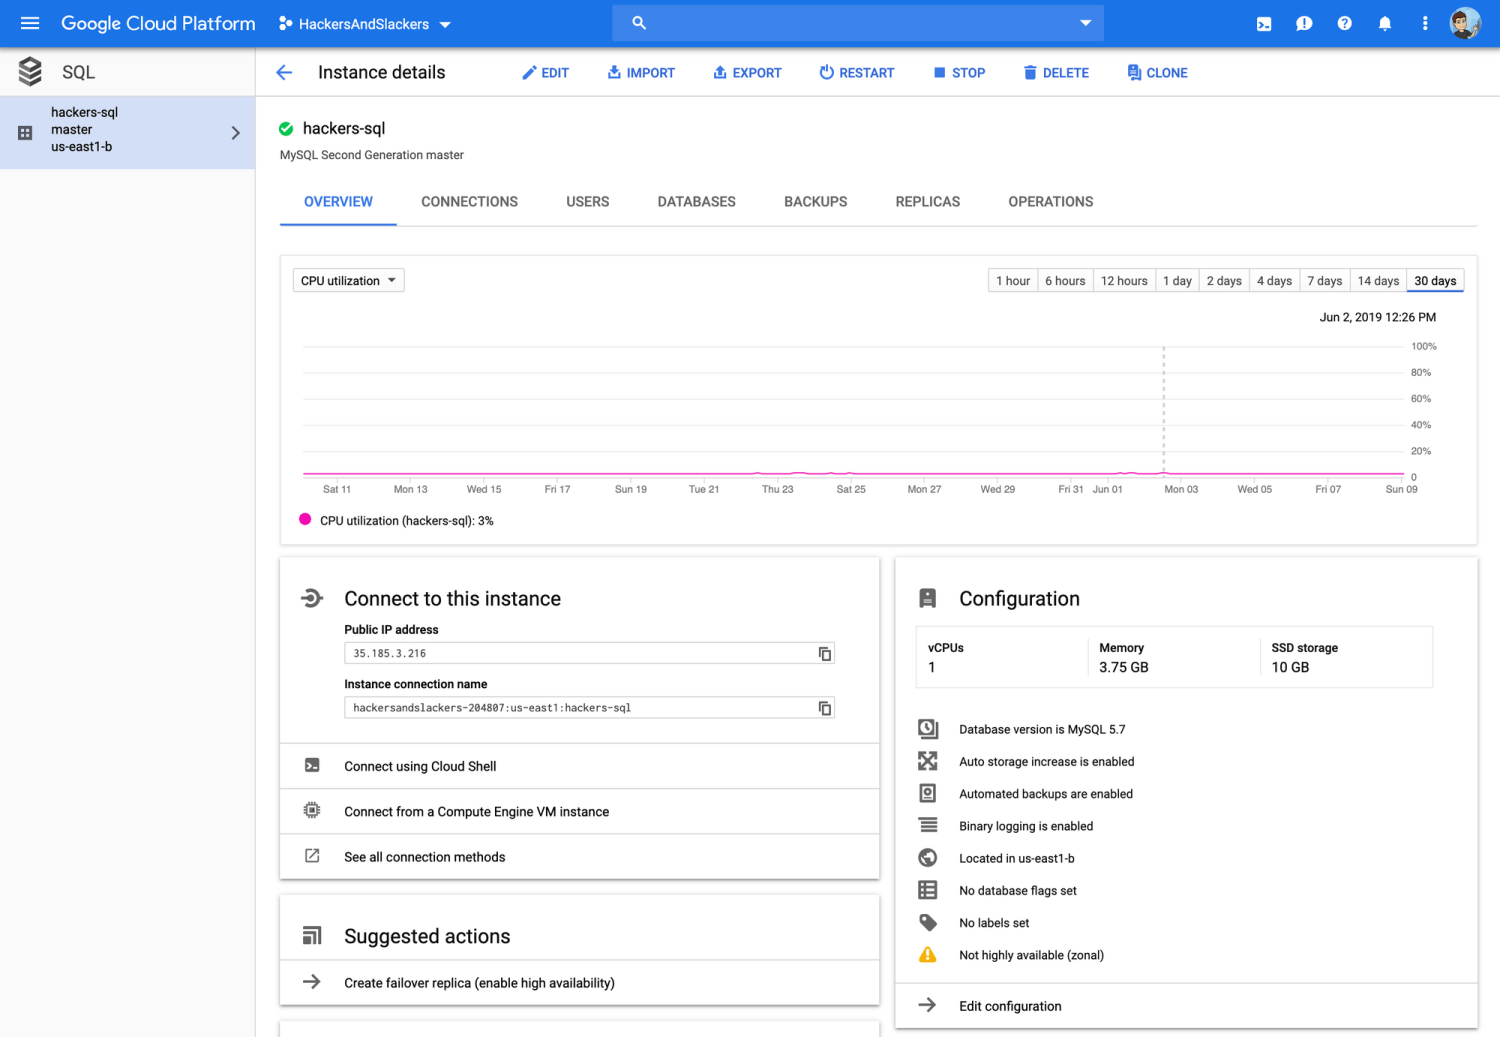 Dashboard for managing a Cloud SQL instance